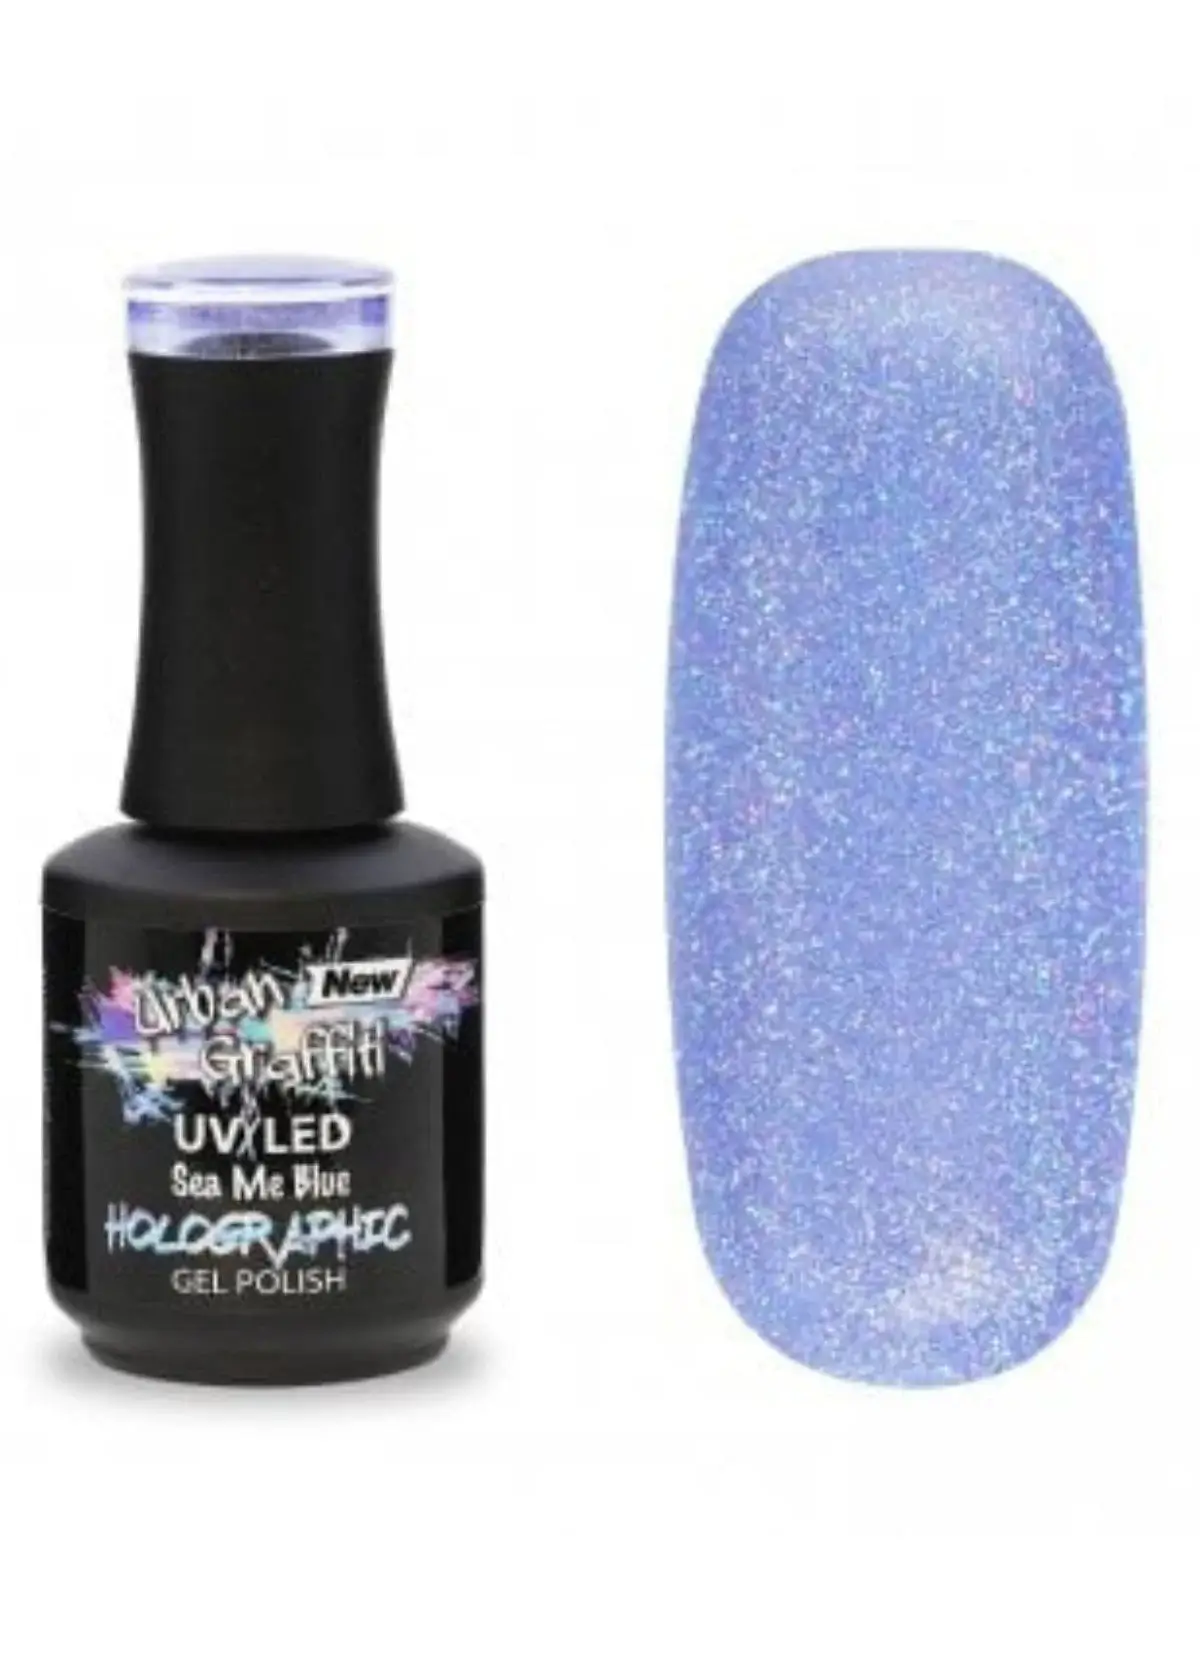 how does holographic nail polish creates a holographic effect?